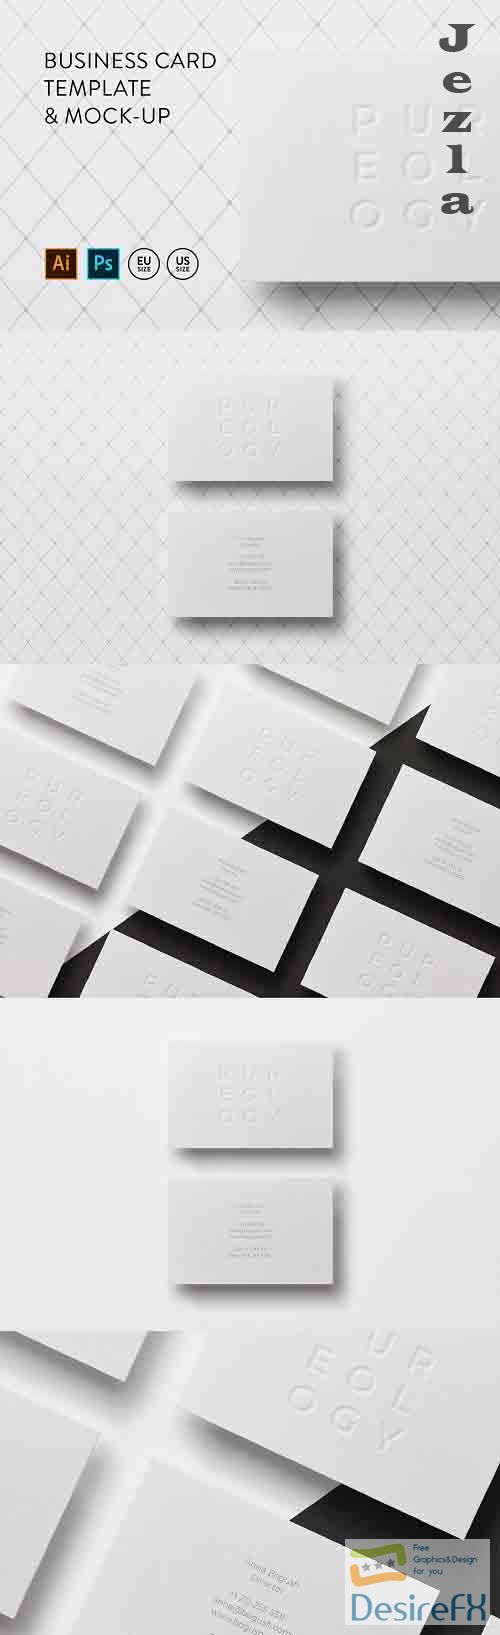 Business card Template &amp; Mock-up #4 - 63942